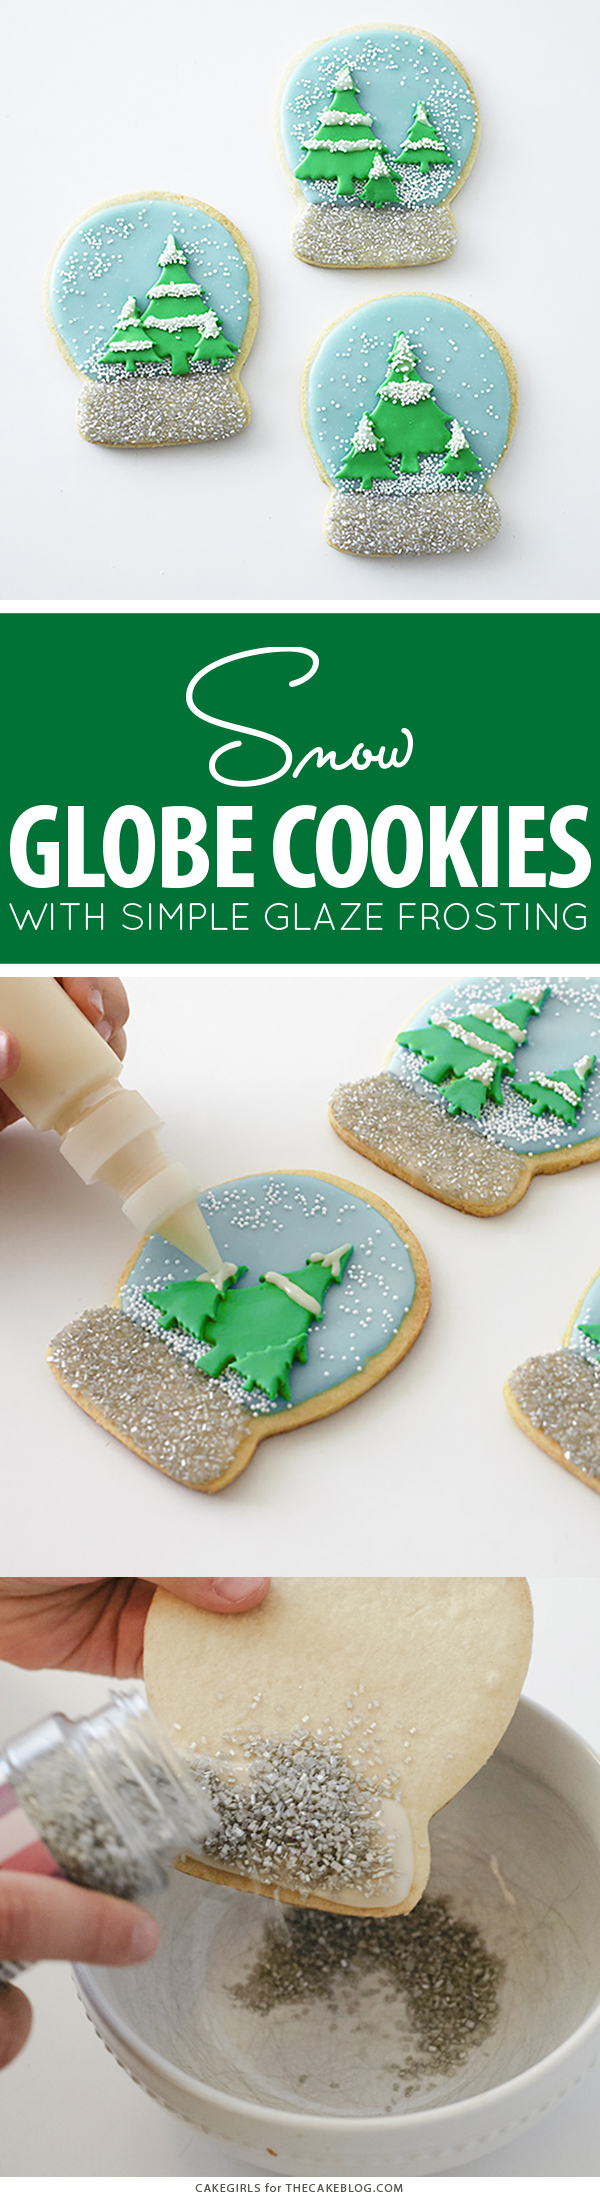 Snow Globe Cookies - decorated sugar cookies for the holidays | by Cakegirls for TheCakeBlog.com